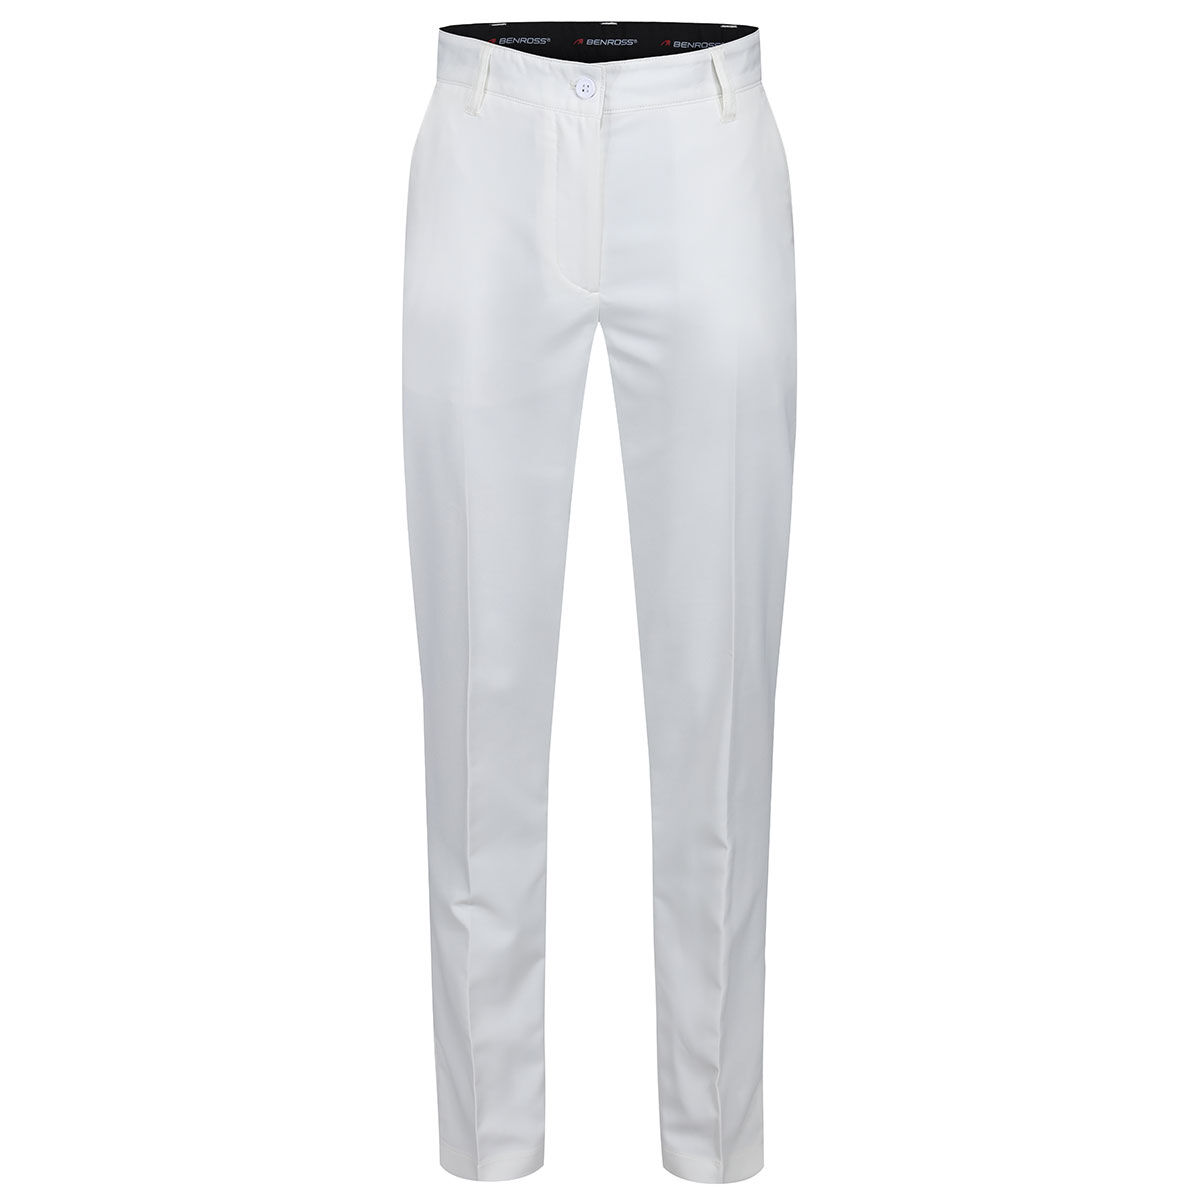 Benross Womens White Core Stretch Golf Trousers, Size: 14 | American Golf von Benross